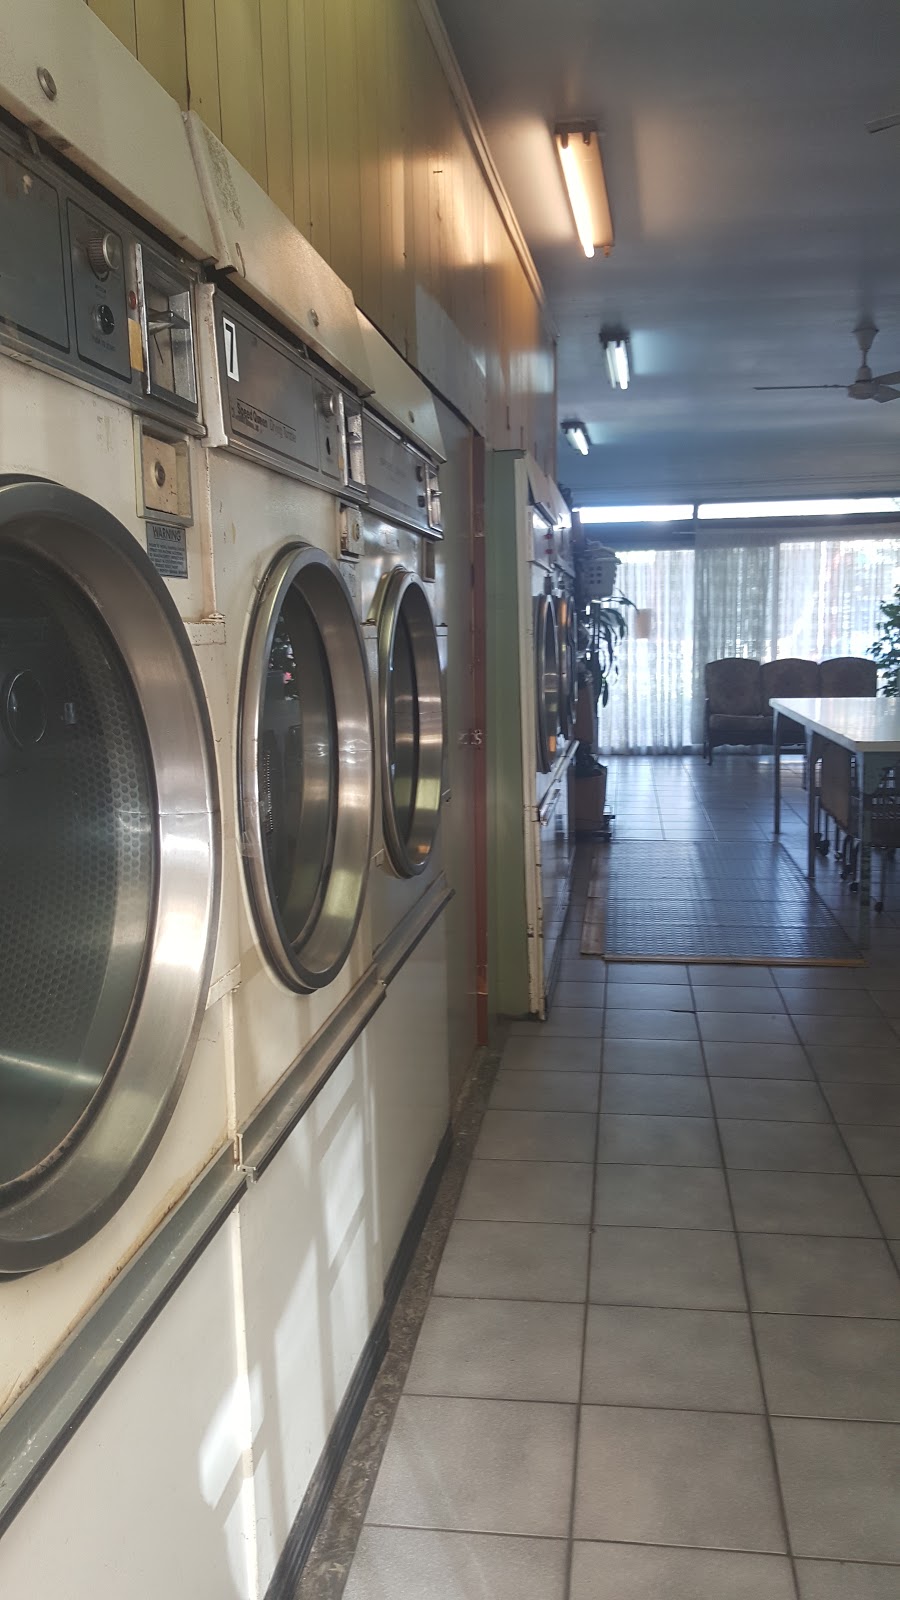 St Marys Coin Laundry | laundry | 228 Queen St, St Marys NSW 2760, Australia | 0296234709 OR +61 2 9623 4709